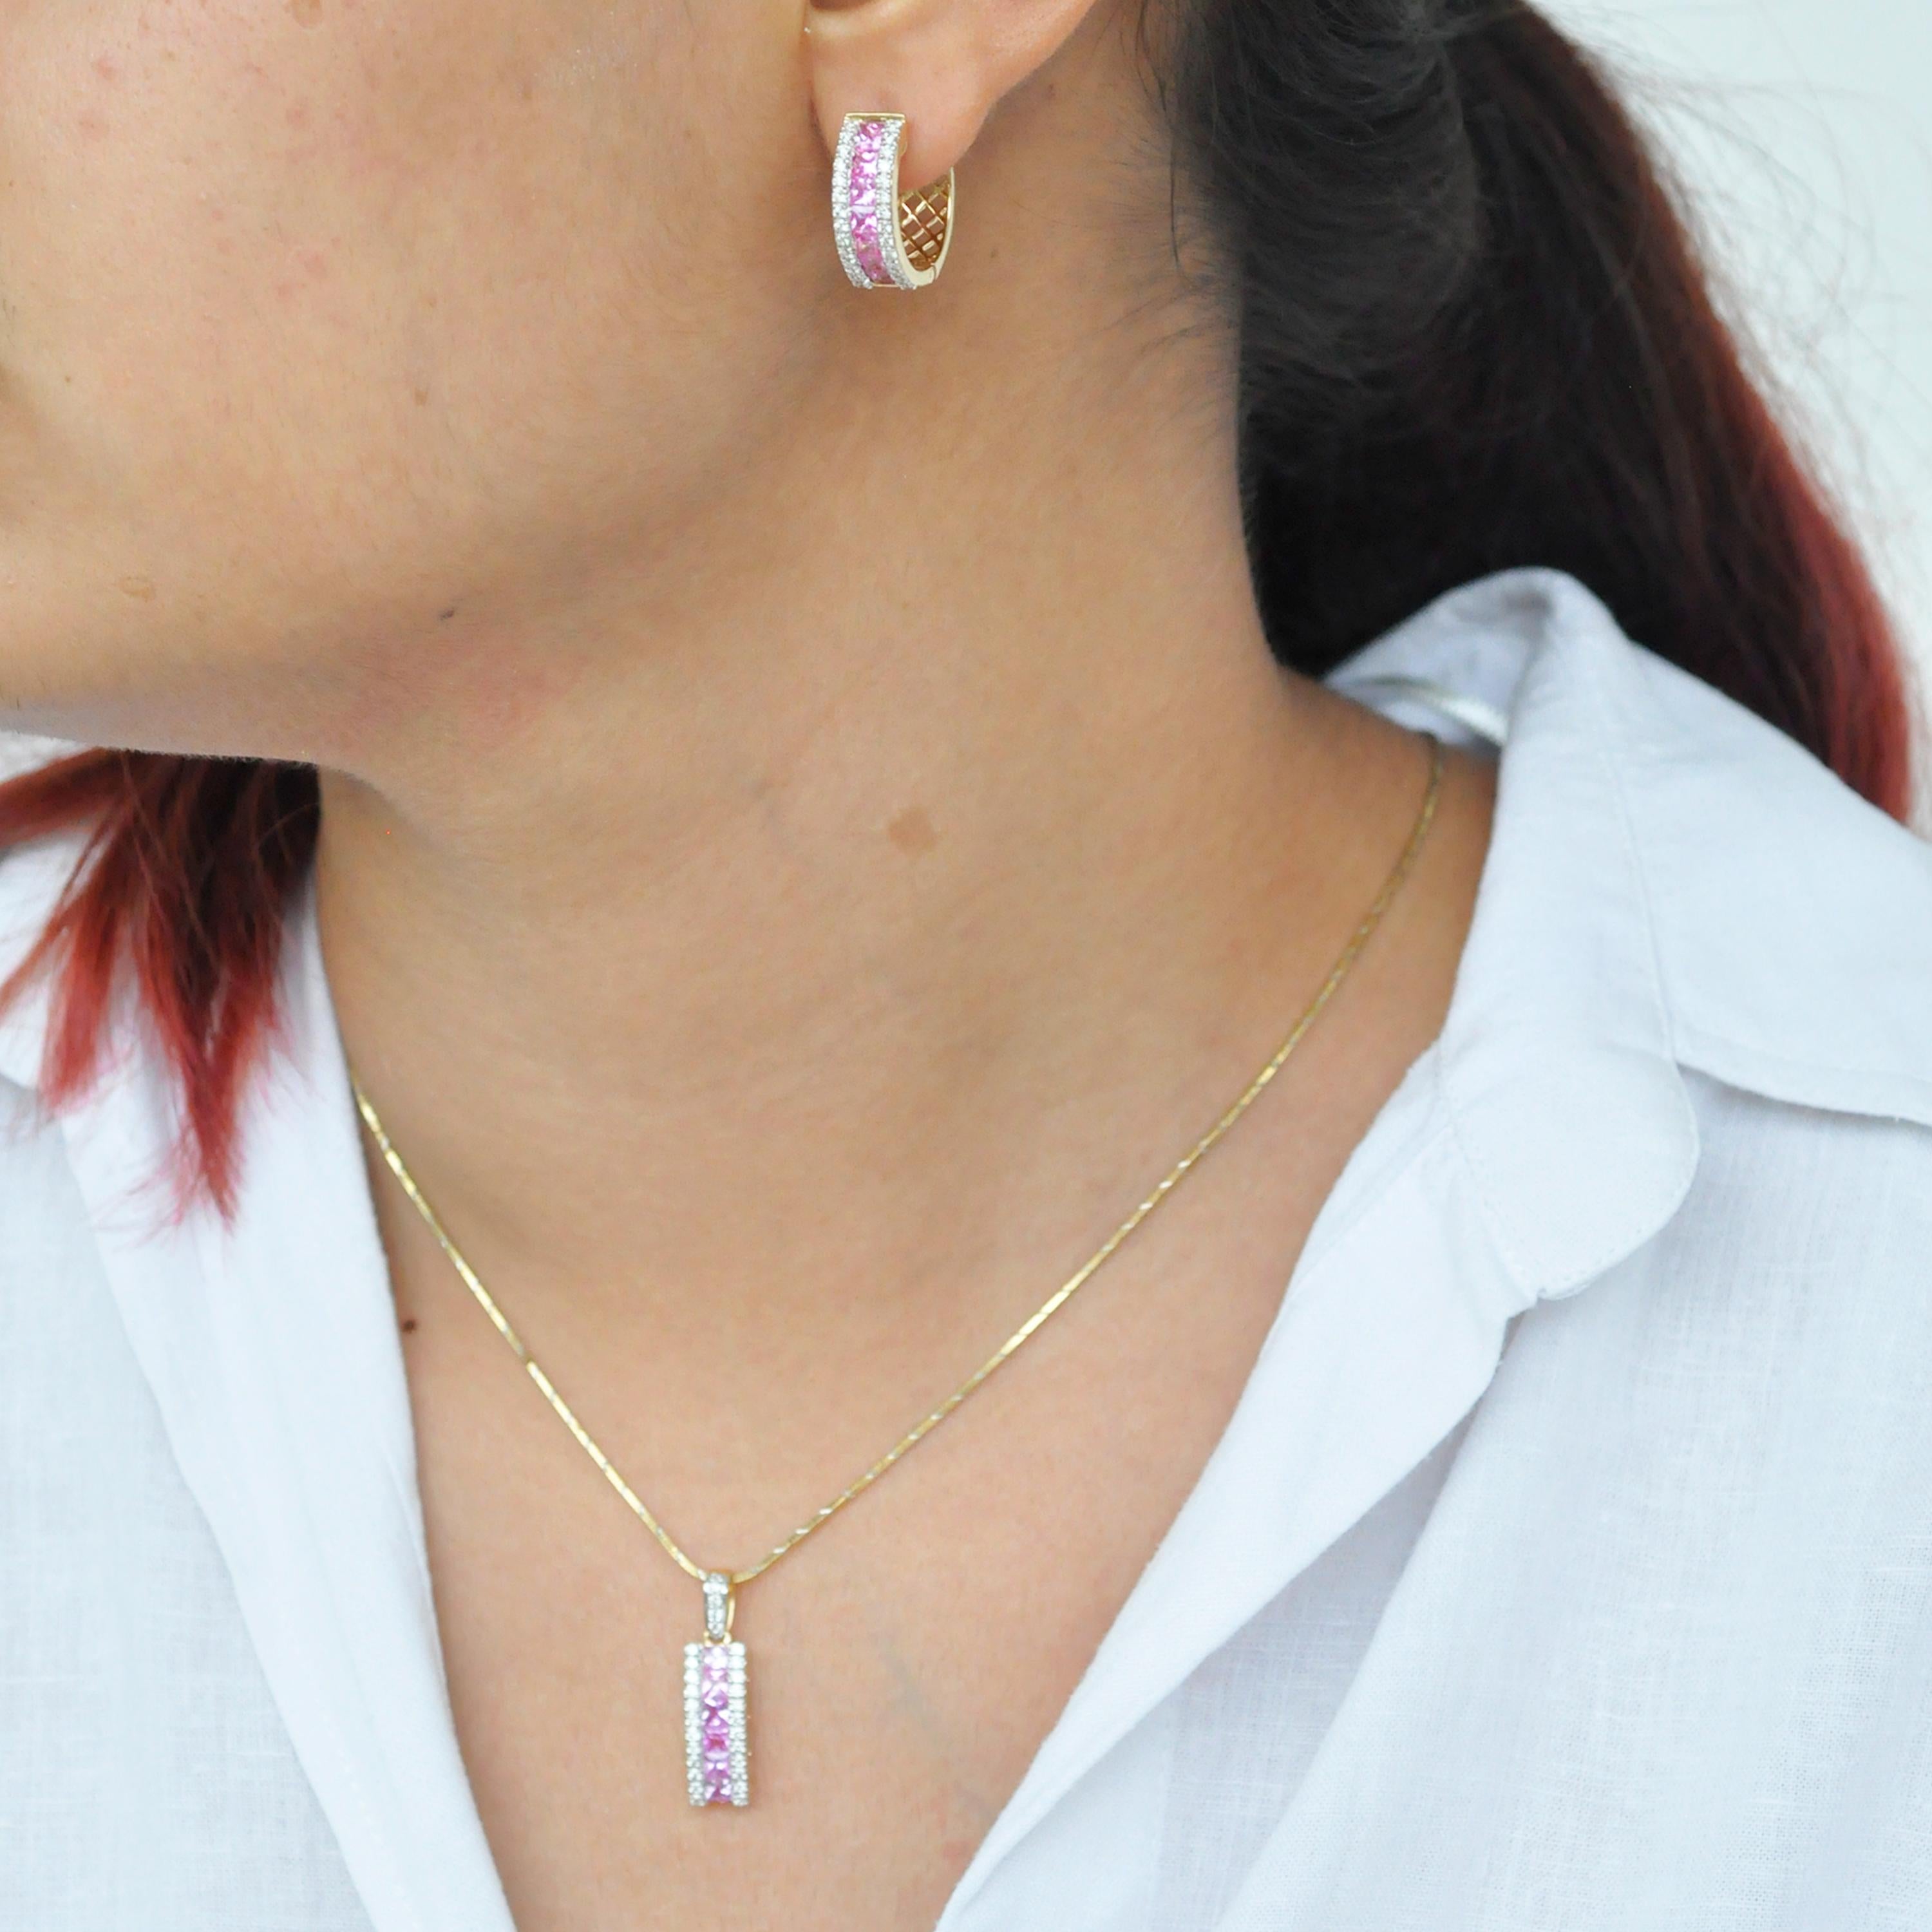 18 karat gold princess cut pink sapphire diamond pendant hoop earrings set.

This beautiful linear set of pendant and hoop earrings with lustrous pink sapphires is extremely spectacular. Elegance and chic in one, this set features high quality clean